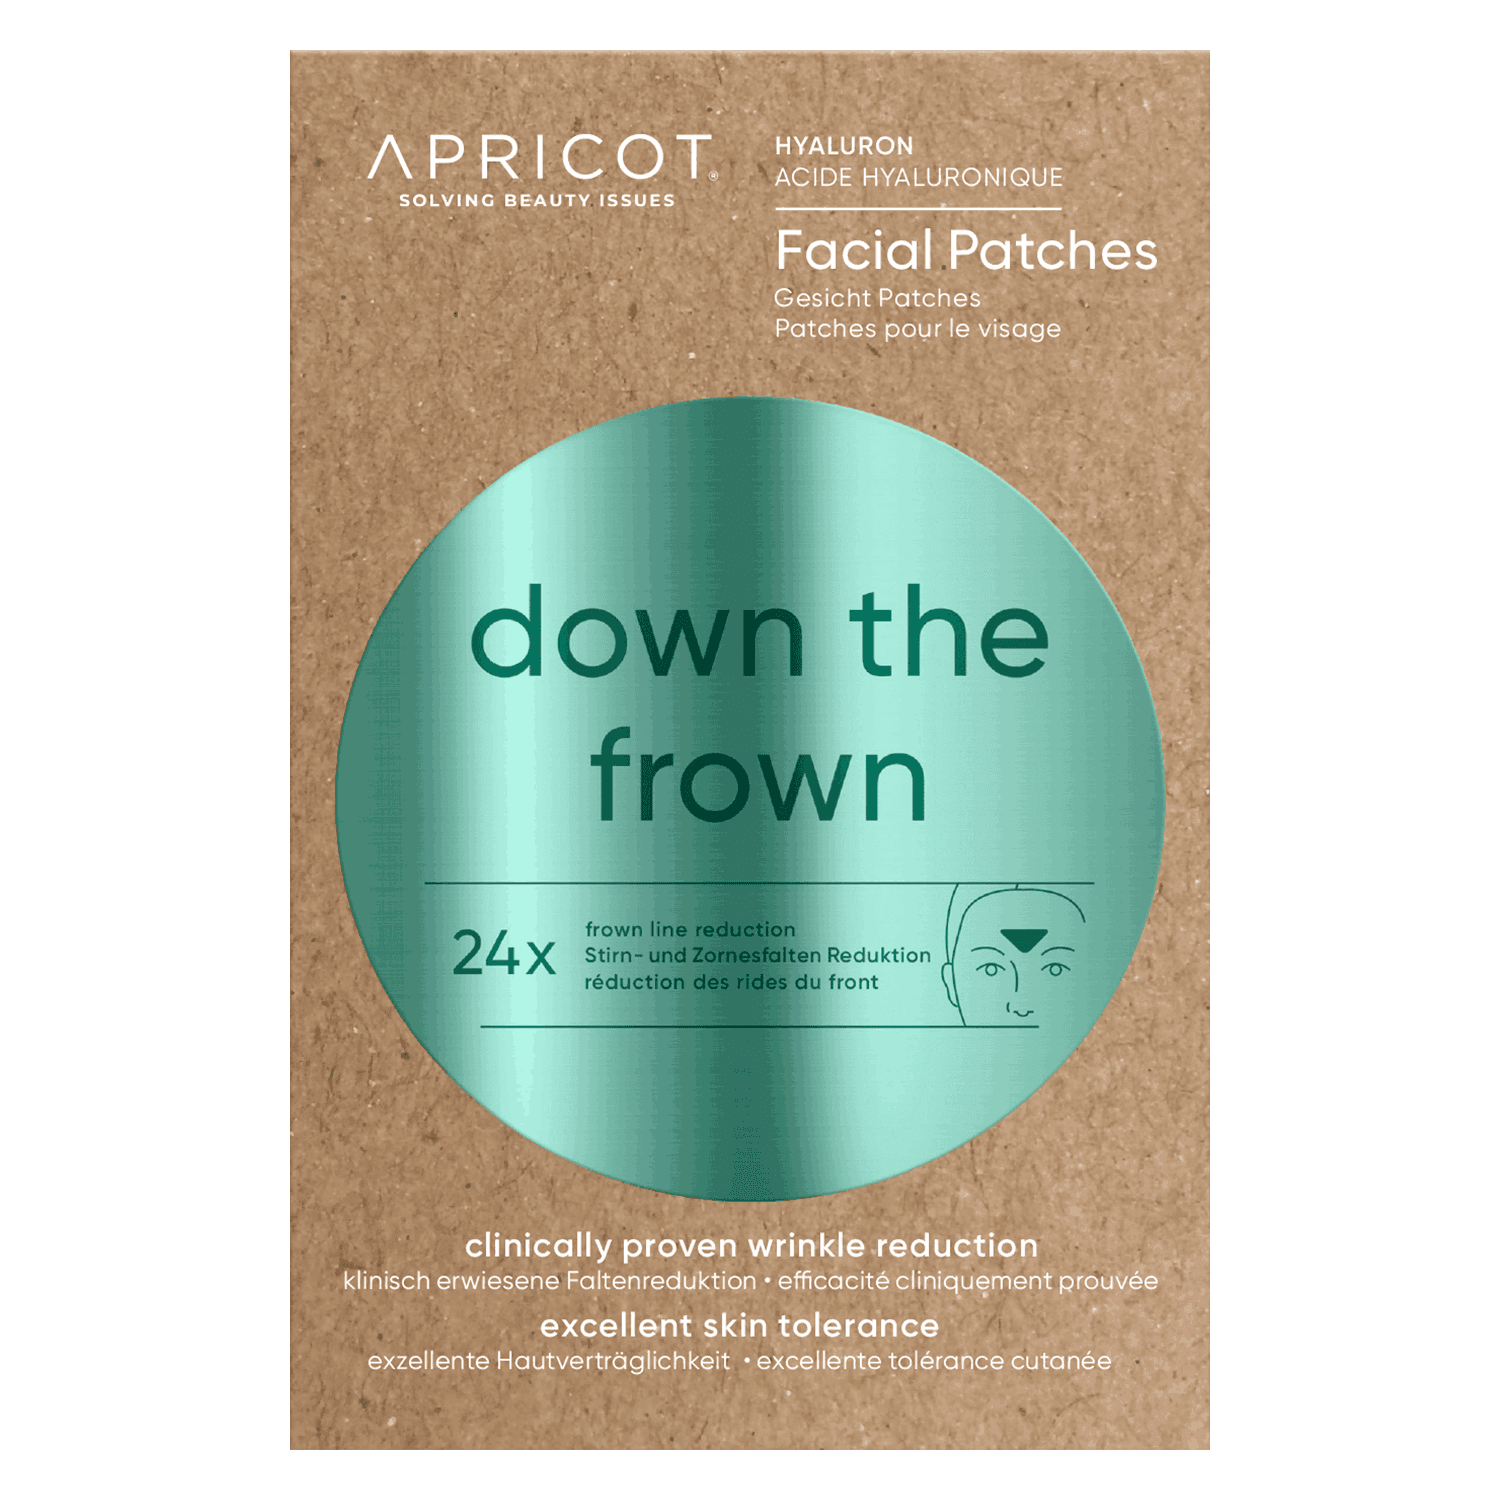 APRICOT - Mini Pack Facial Patches down the frown